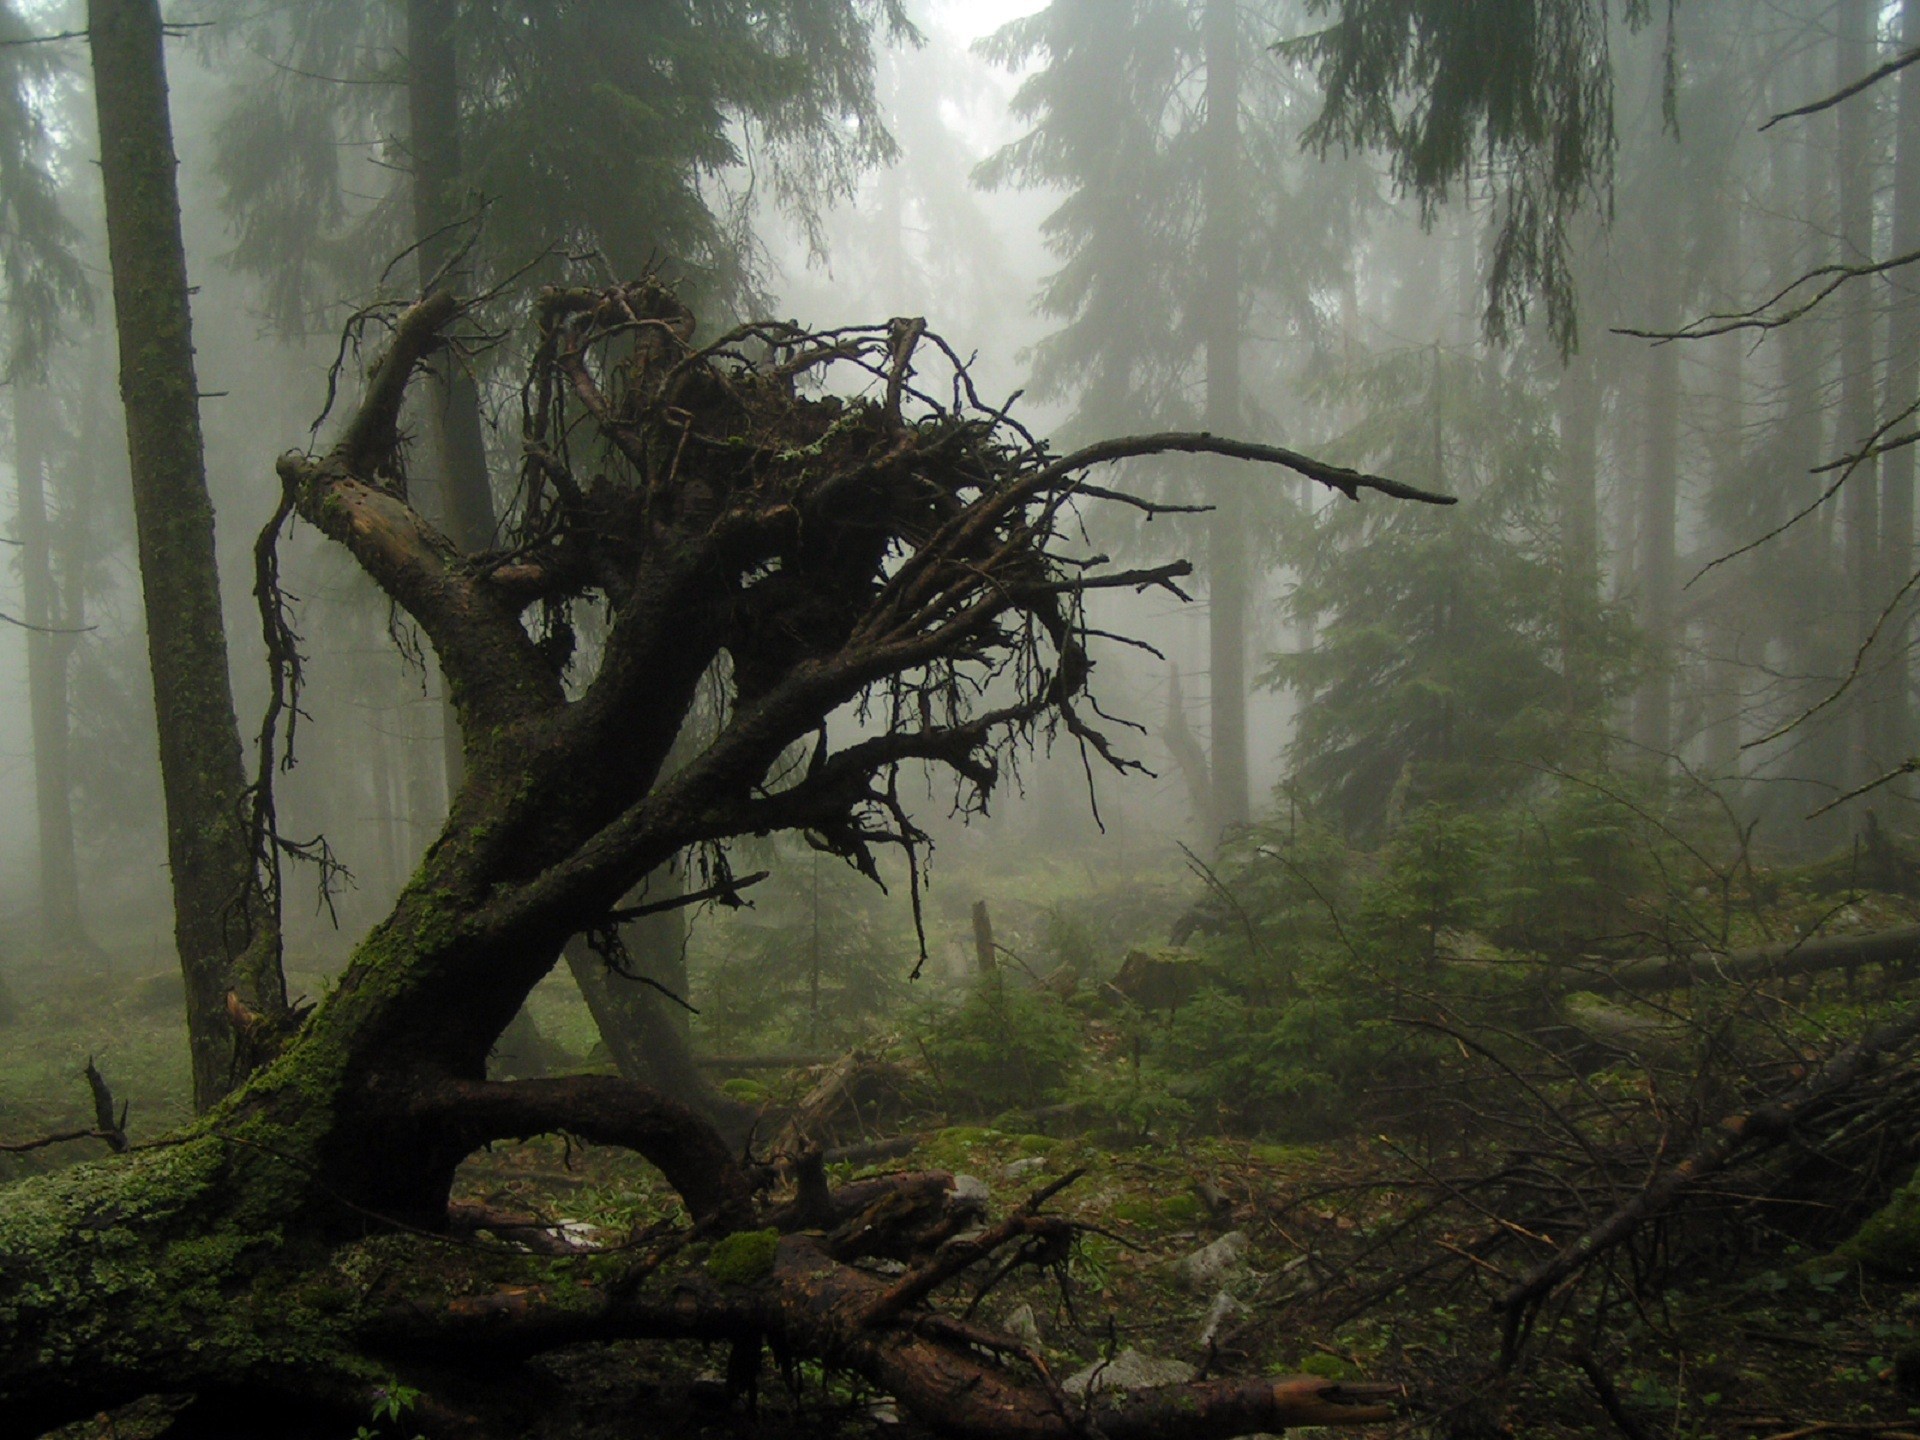 Nature___Forest___The_roots_of_a_fallen_